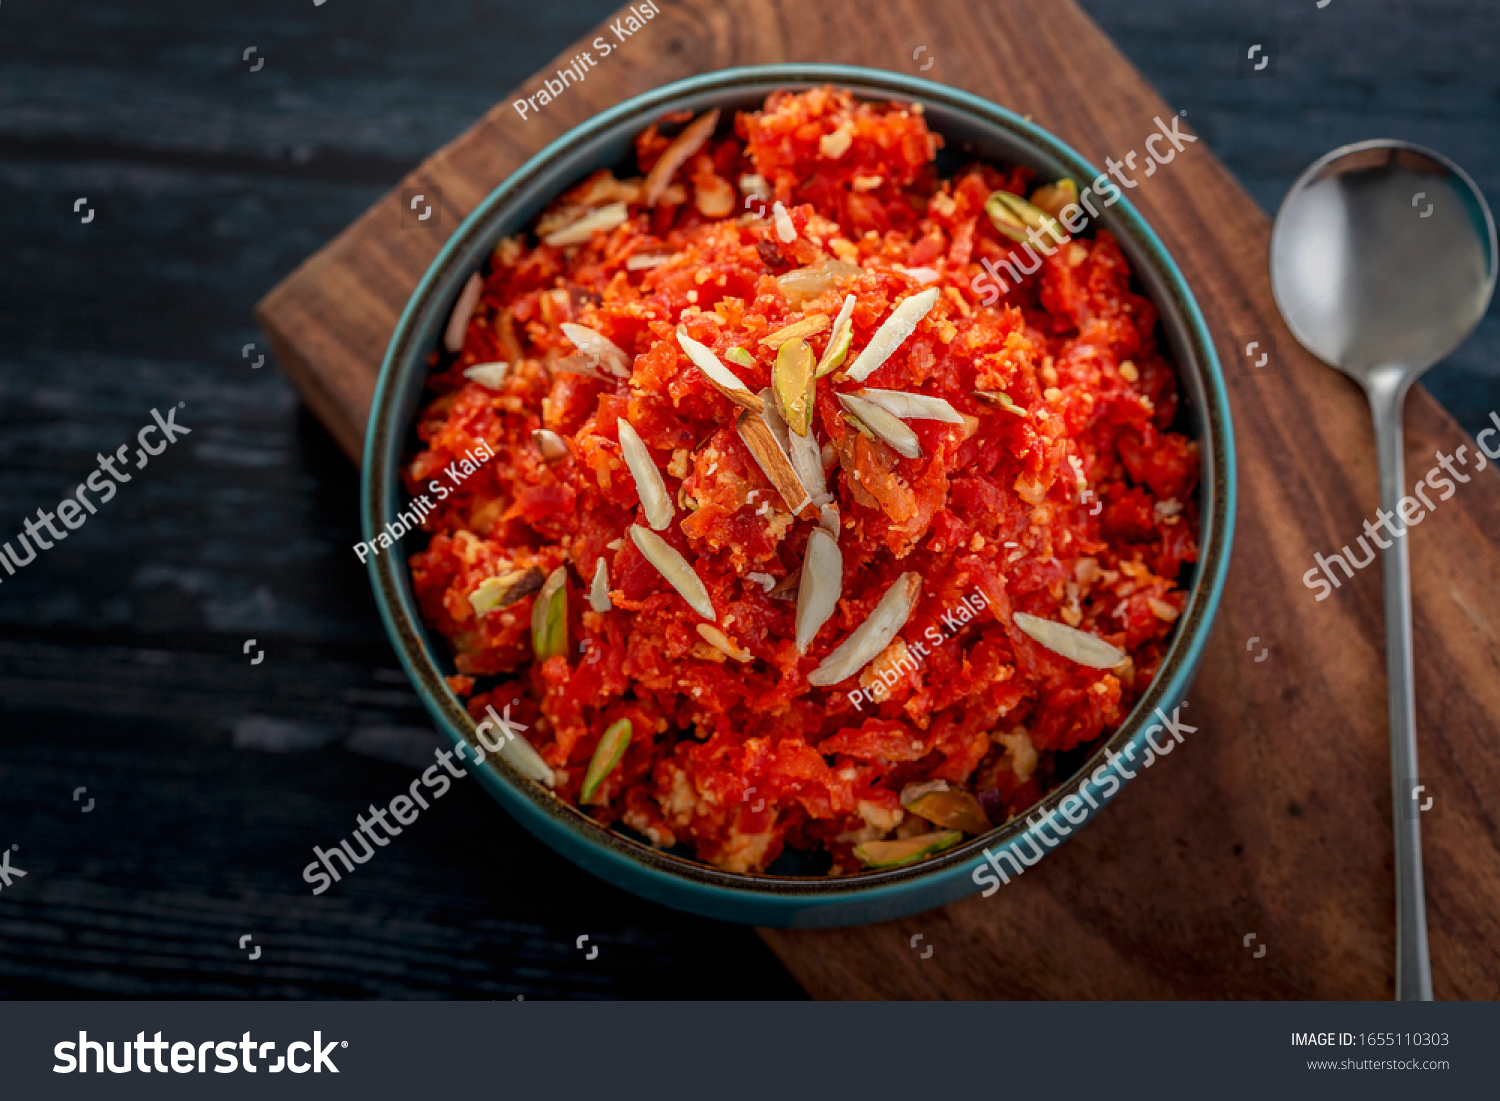 
Gajar ka halwa is a sweet dessert pudding from India made from carrot, served in a bowl. Garnished with cashew, almond and pistachio nuts. #1655110303